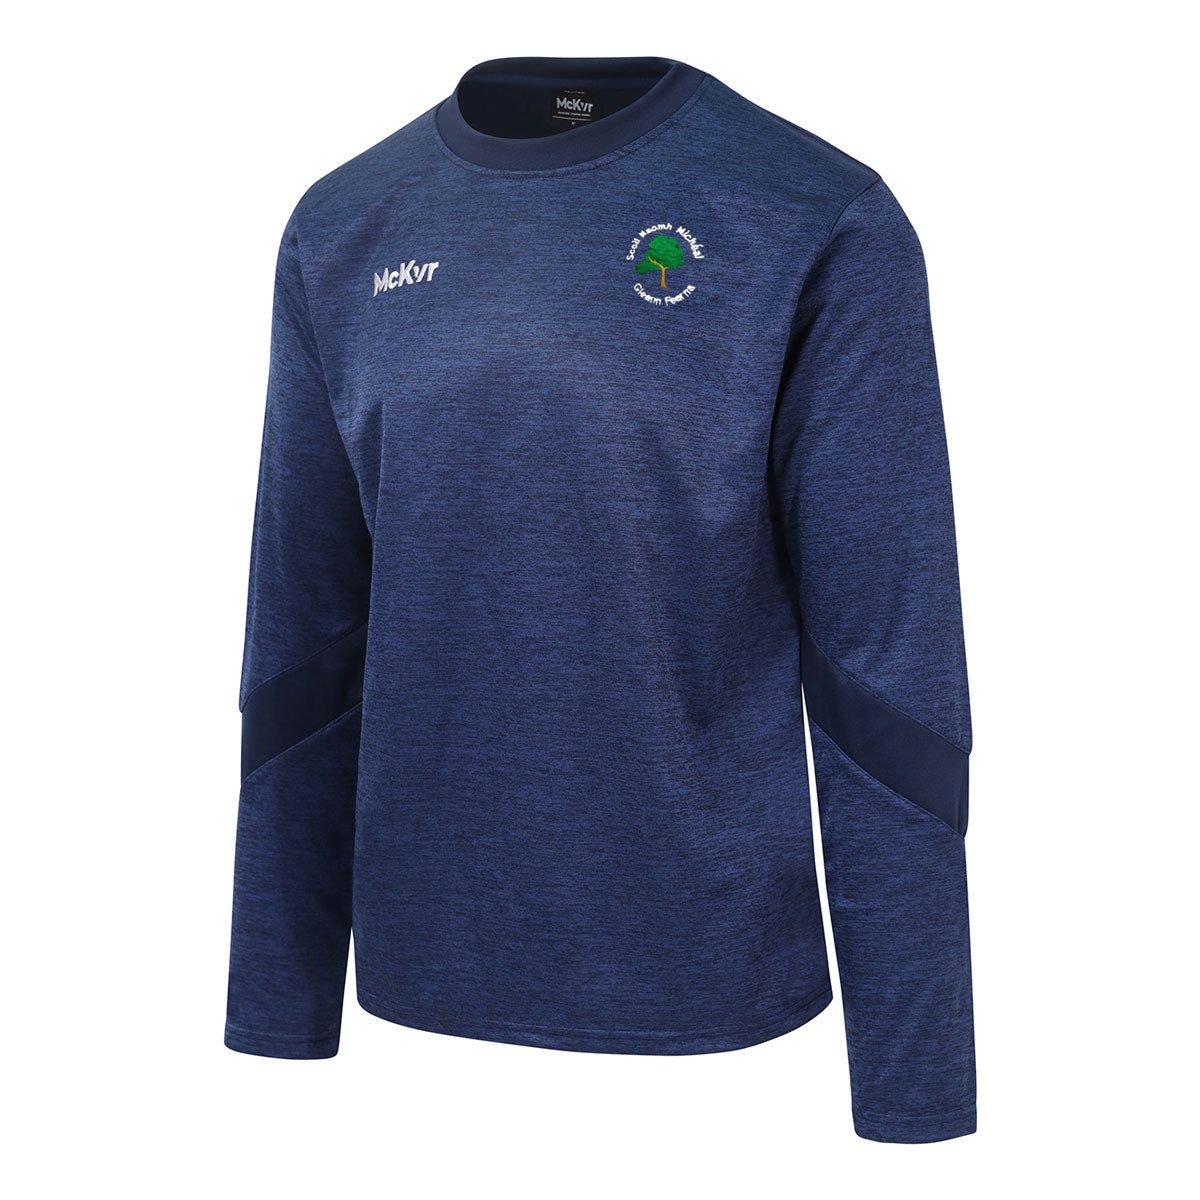 Mc Keever St. Michael's N.S Core 22 Sweat Top - Adult - Navy